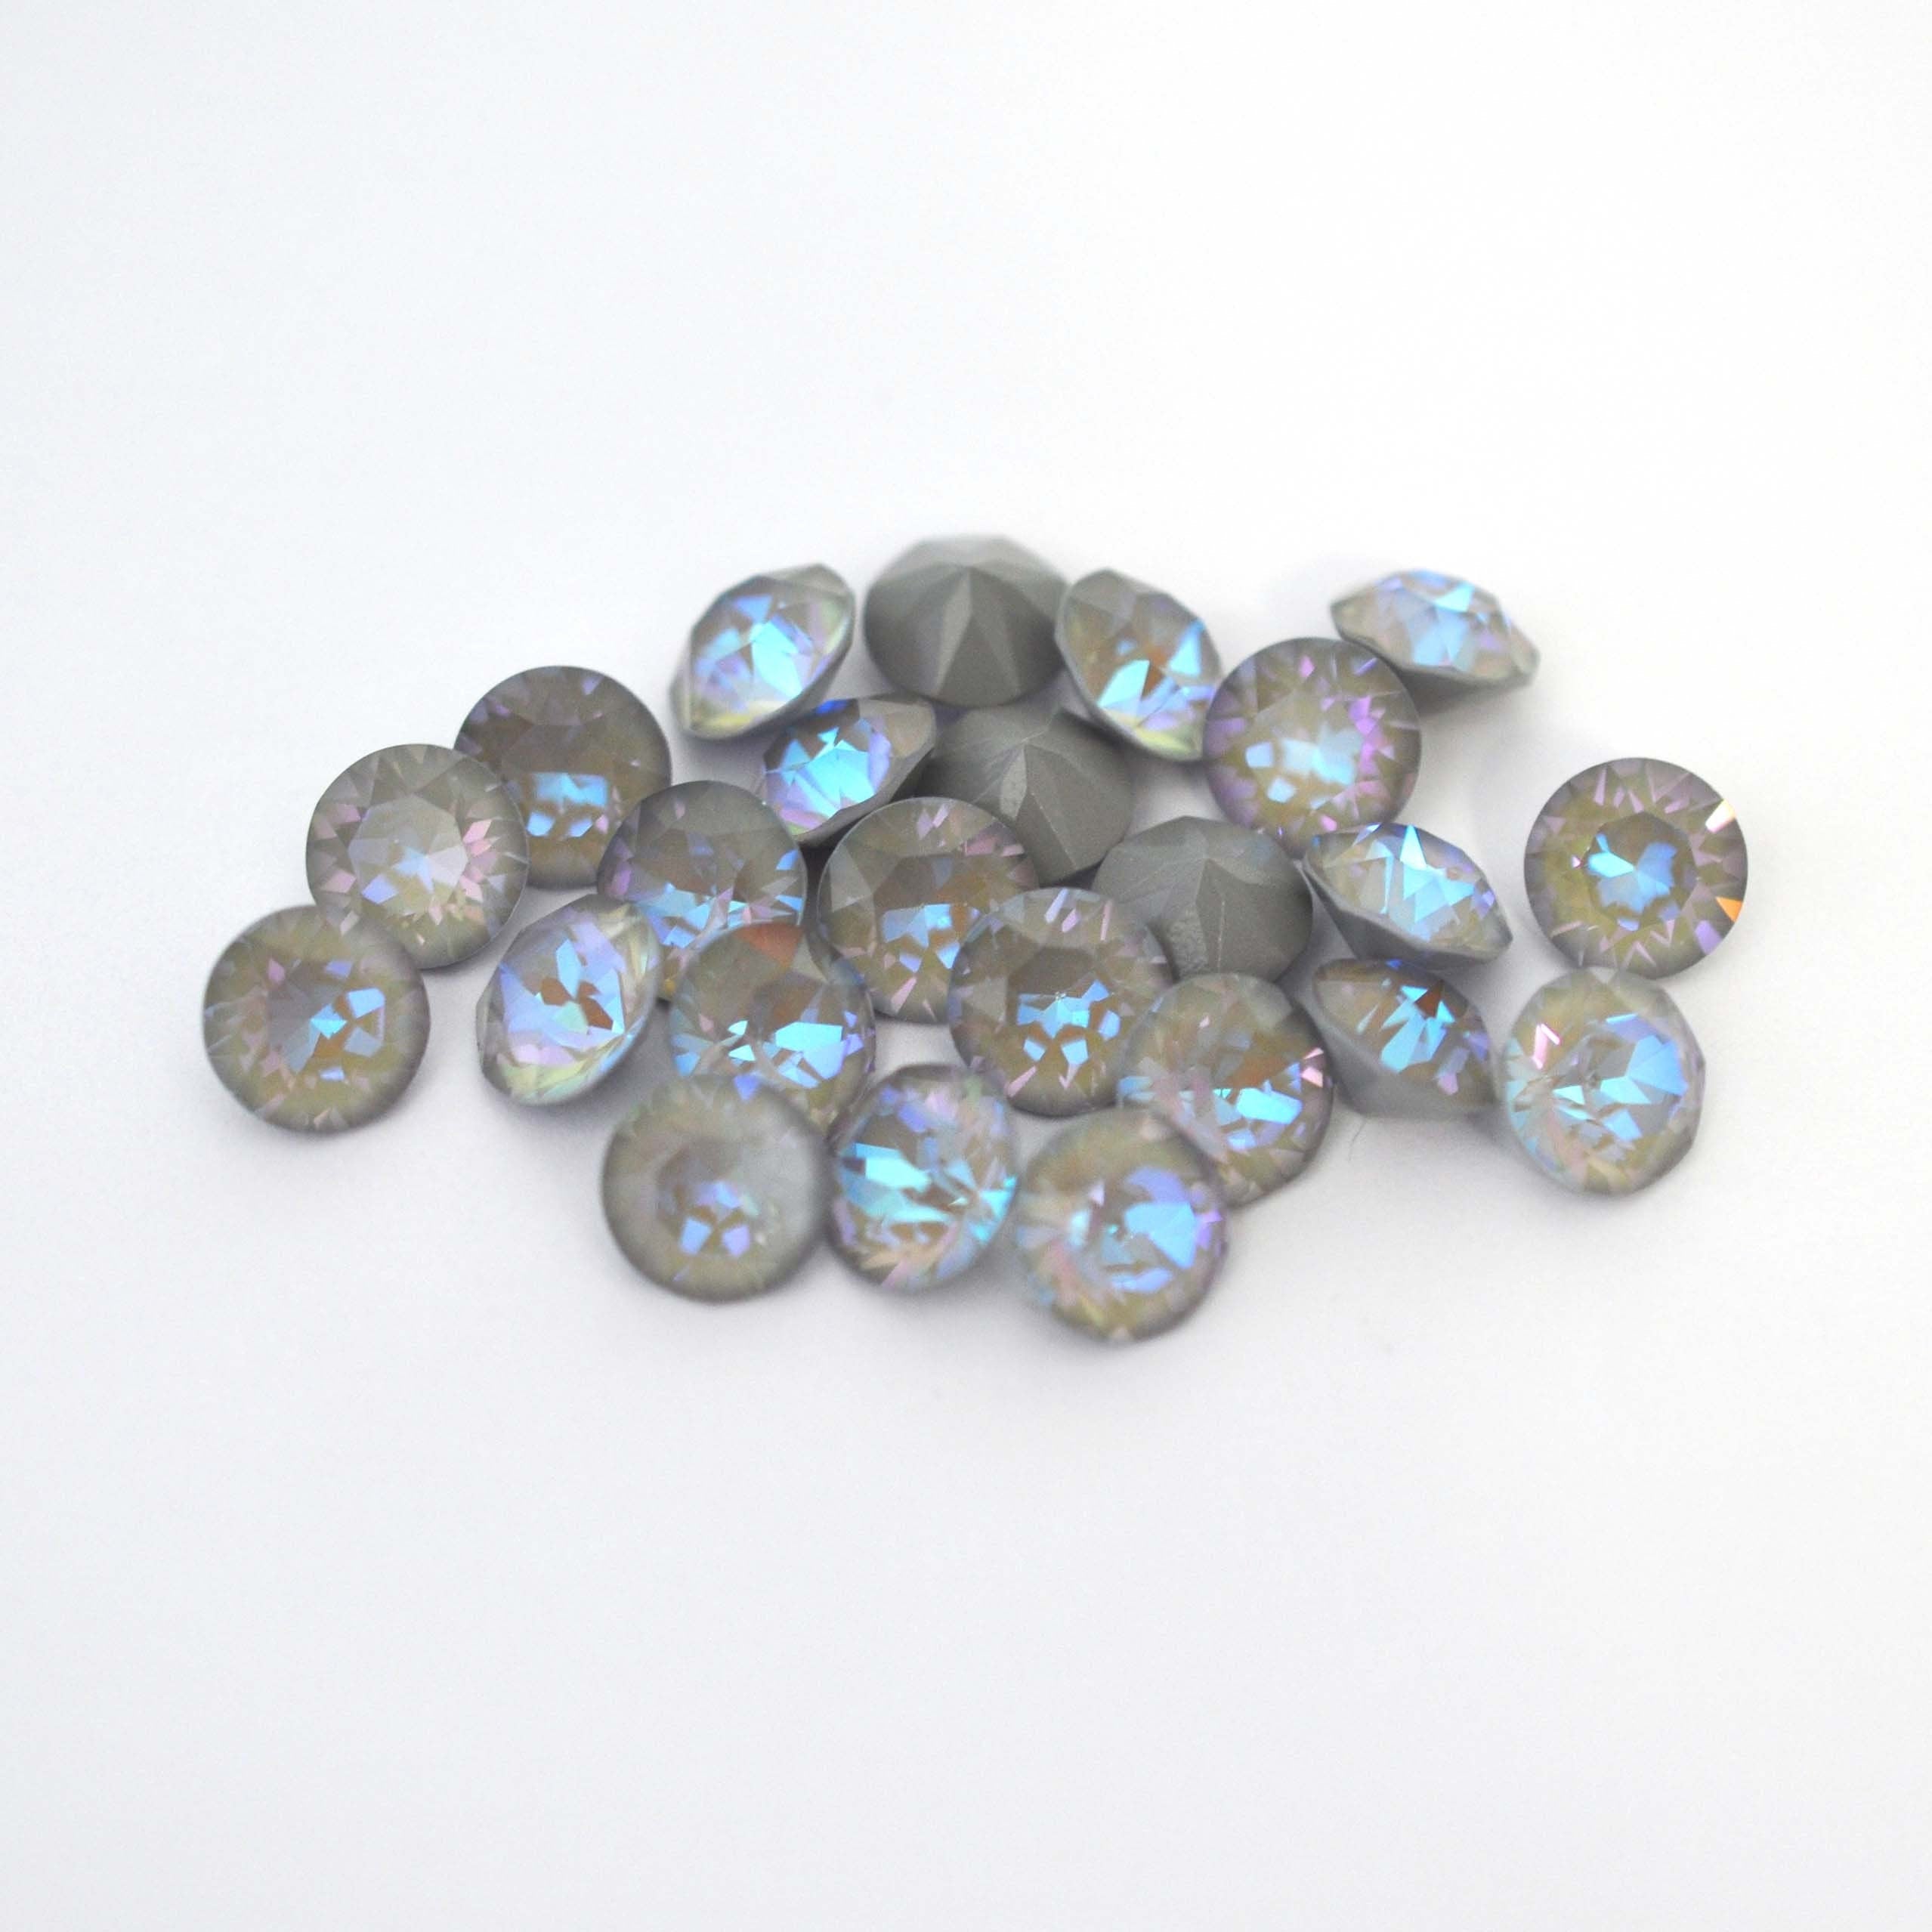 Serene Gray Delite 1088 Pointed Back Chaton Barton Crystal 39ss, 8mm